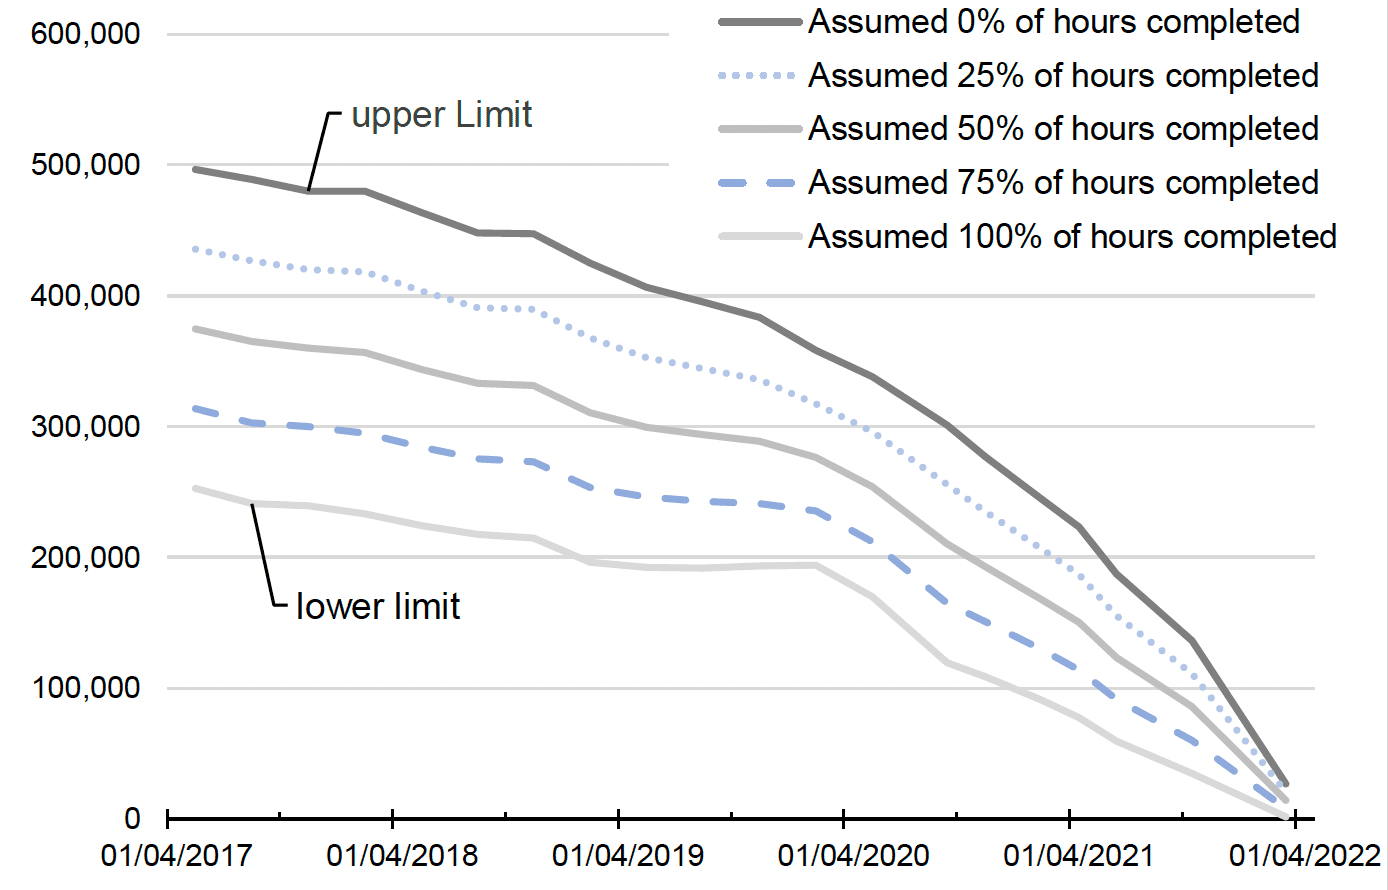 A graph with five lines representing different assumptions in the model completion rates from 01 April 2017 to 31 March 2022. The lines all decrease from left to right for this time period. The upper limit from approx. 500,000 hours to about zero. The lower limit from approx. 250,000 hours to about zero.